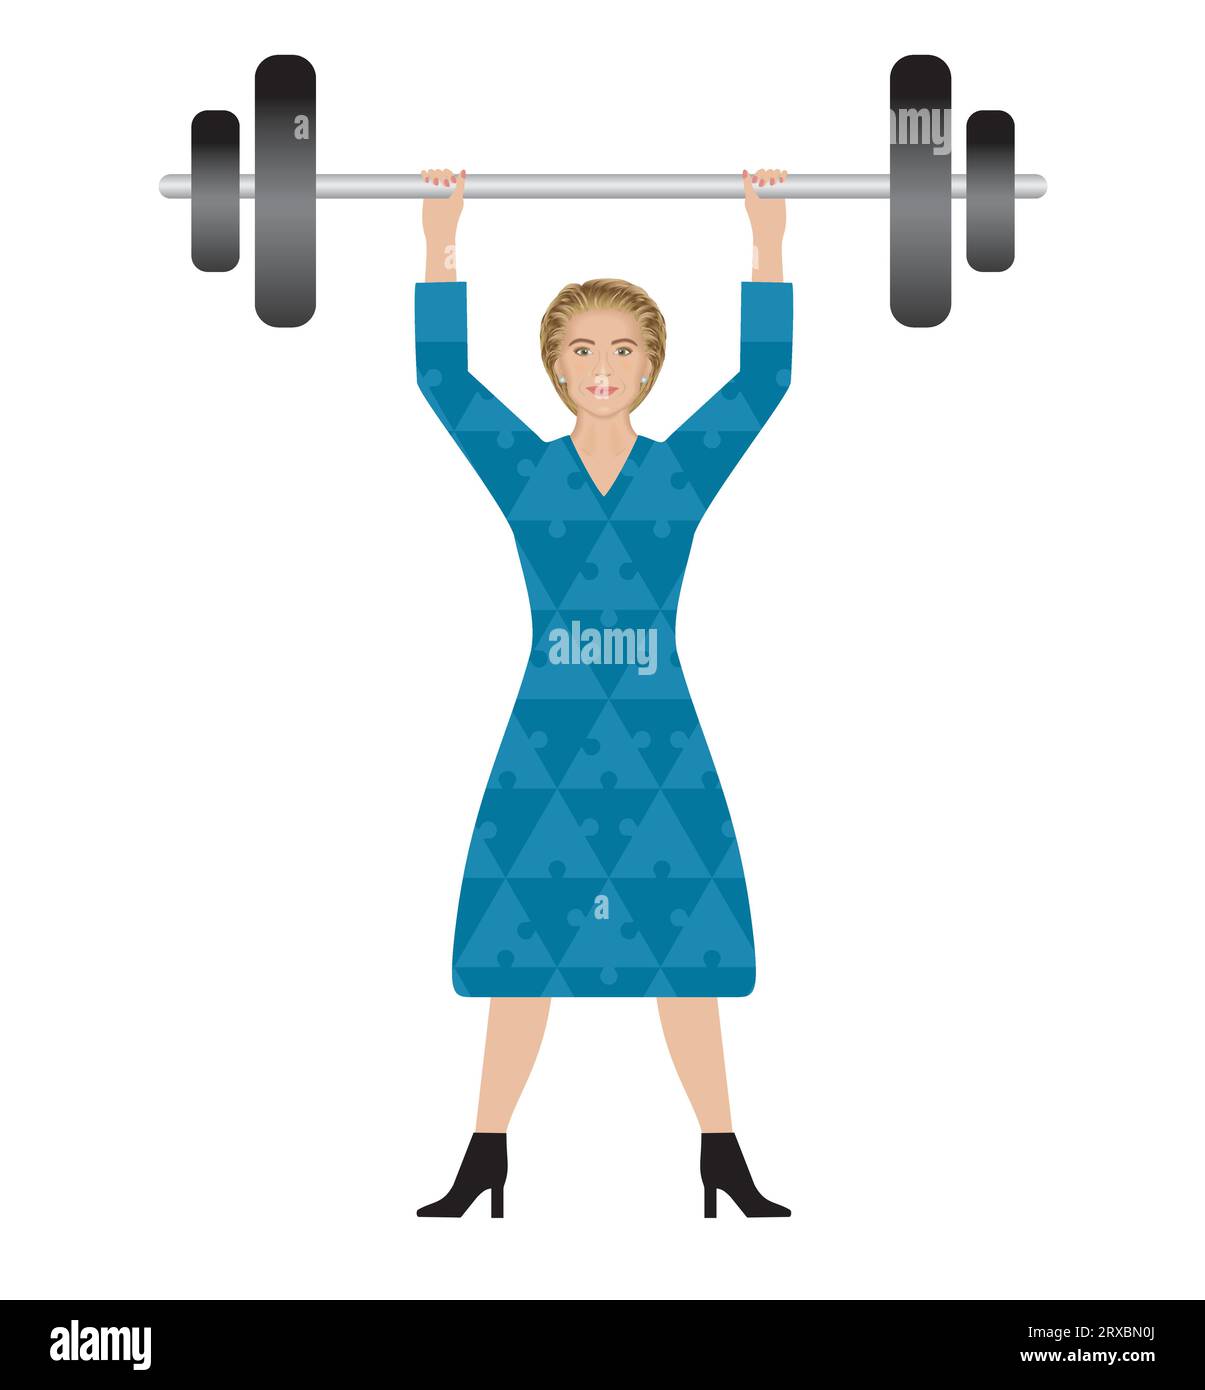 Big Set Of People Doing Exercises In The Gym. Workout With Dumbbell For  Different Groups Of Muscles. Arm And Upper Body Training For Women.  Isolated Flat Vector Illustration Royalty Free SVG, Cliparts